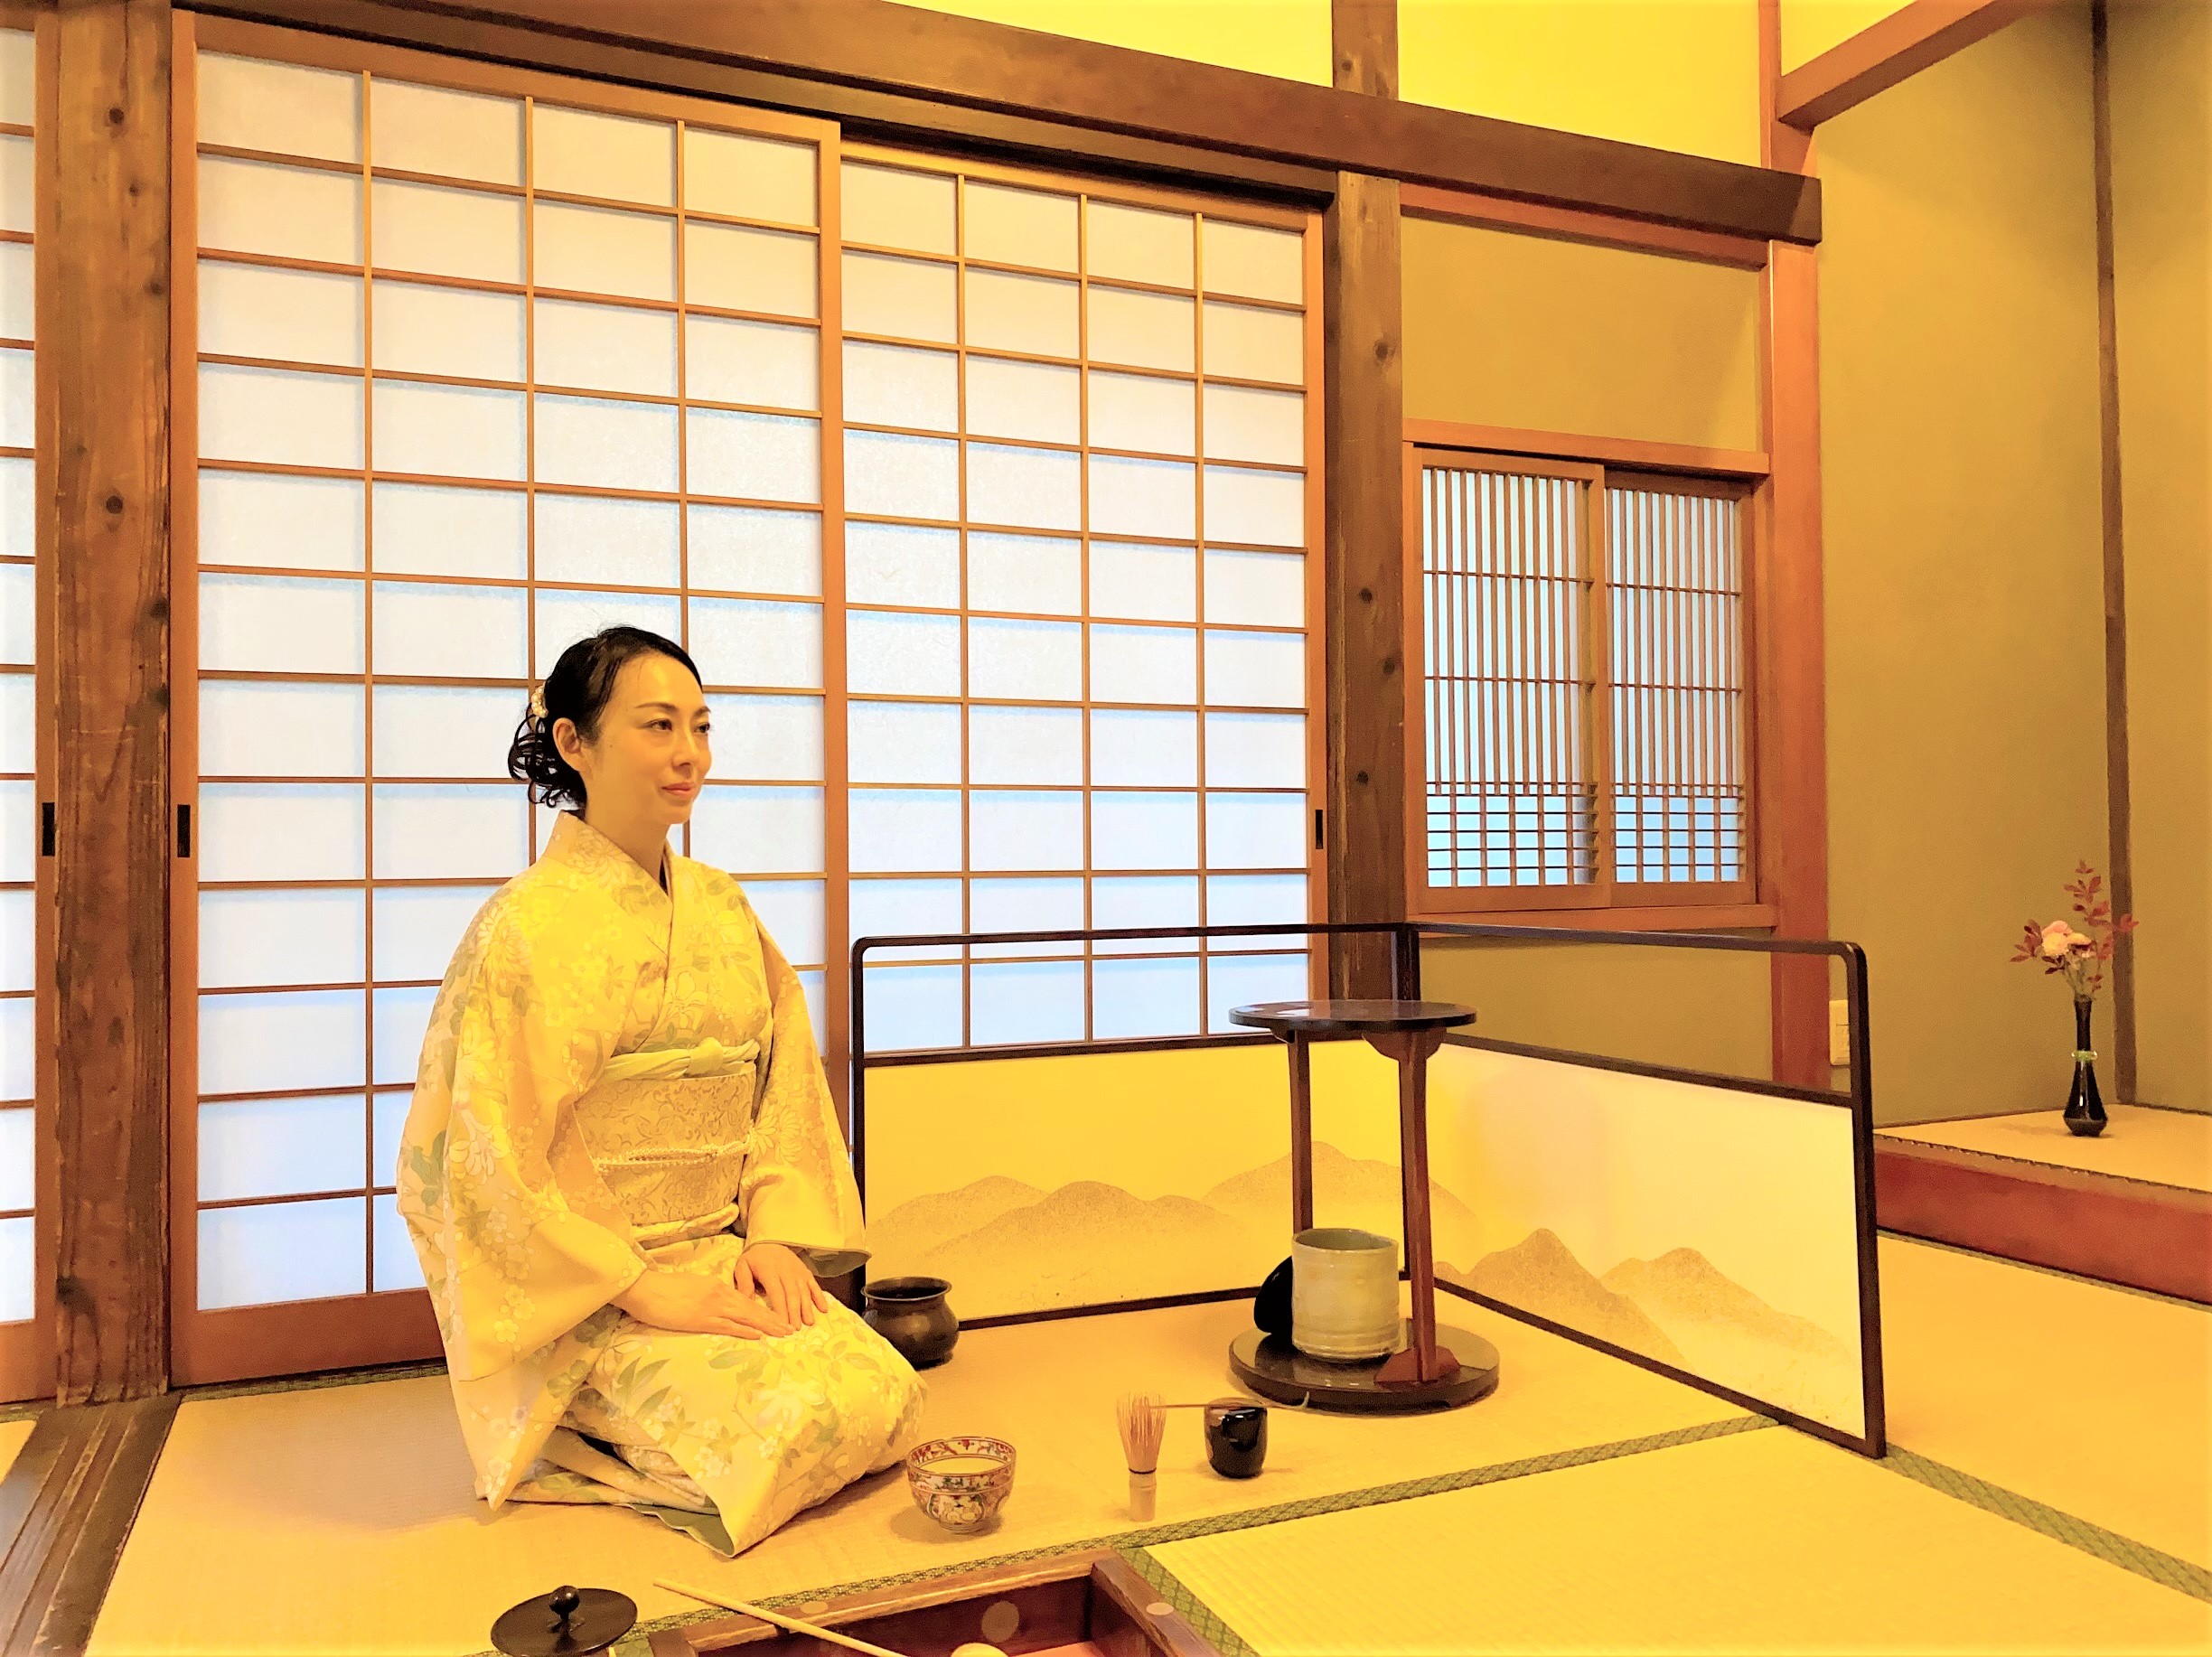 Authentic Japanese Tea Ceremony in a Beautiful temple